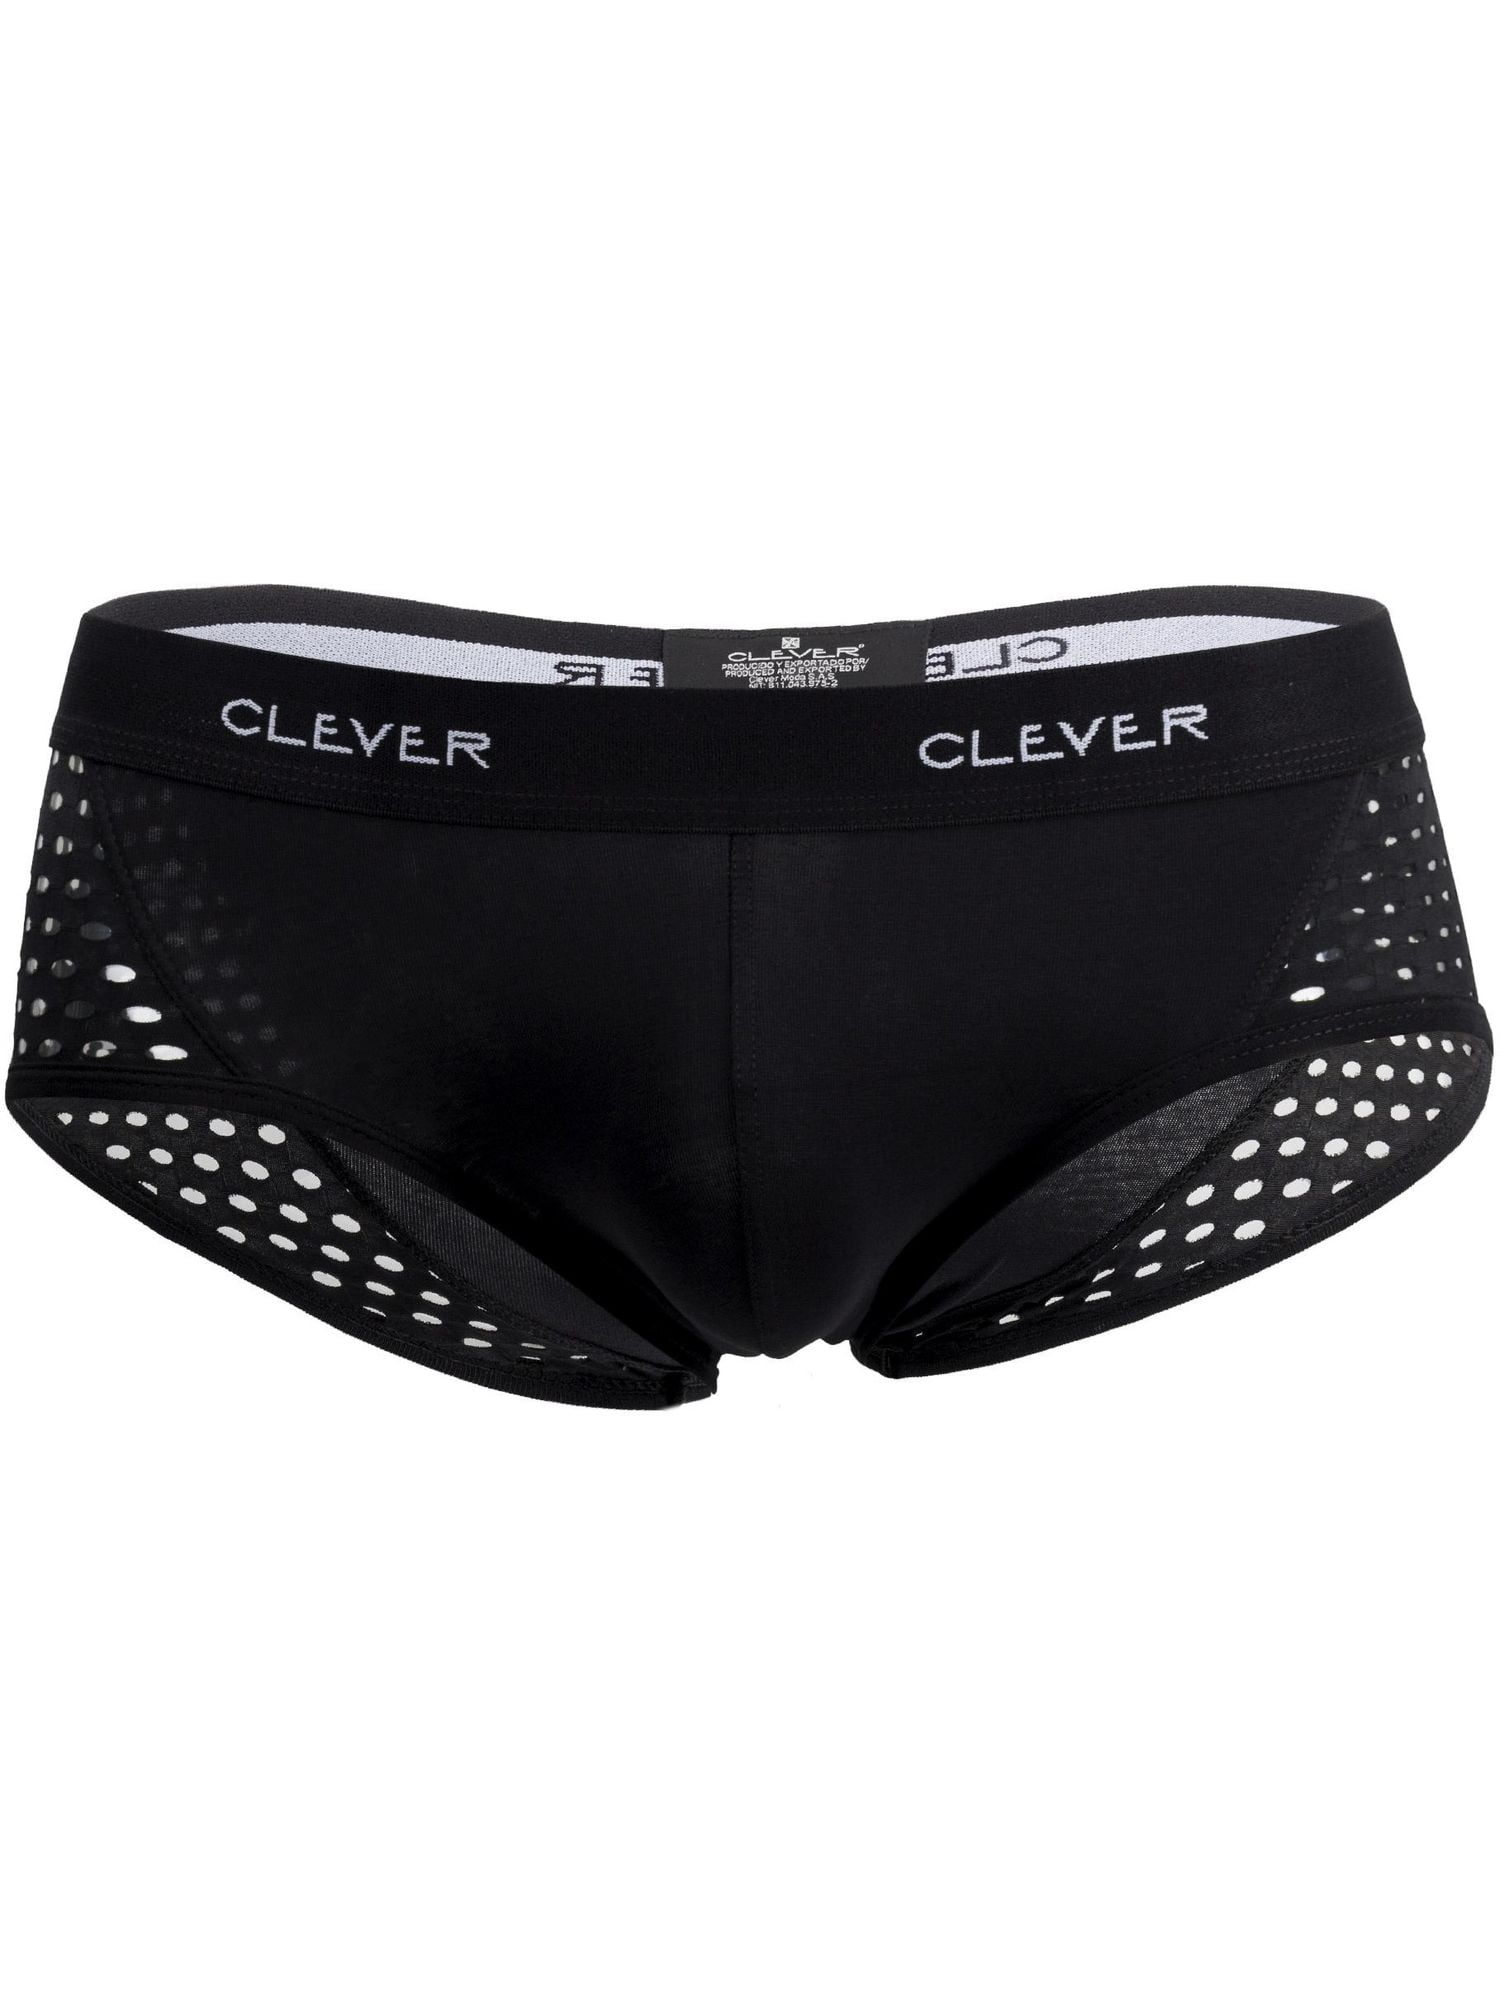 Clever 5386 Glamour Piping Briefs - Walmart.com